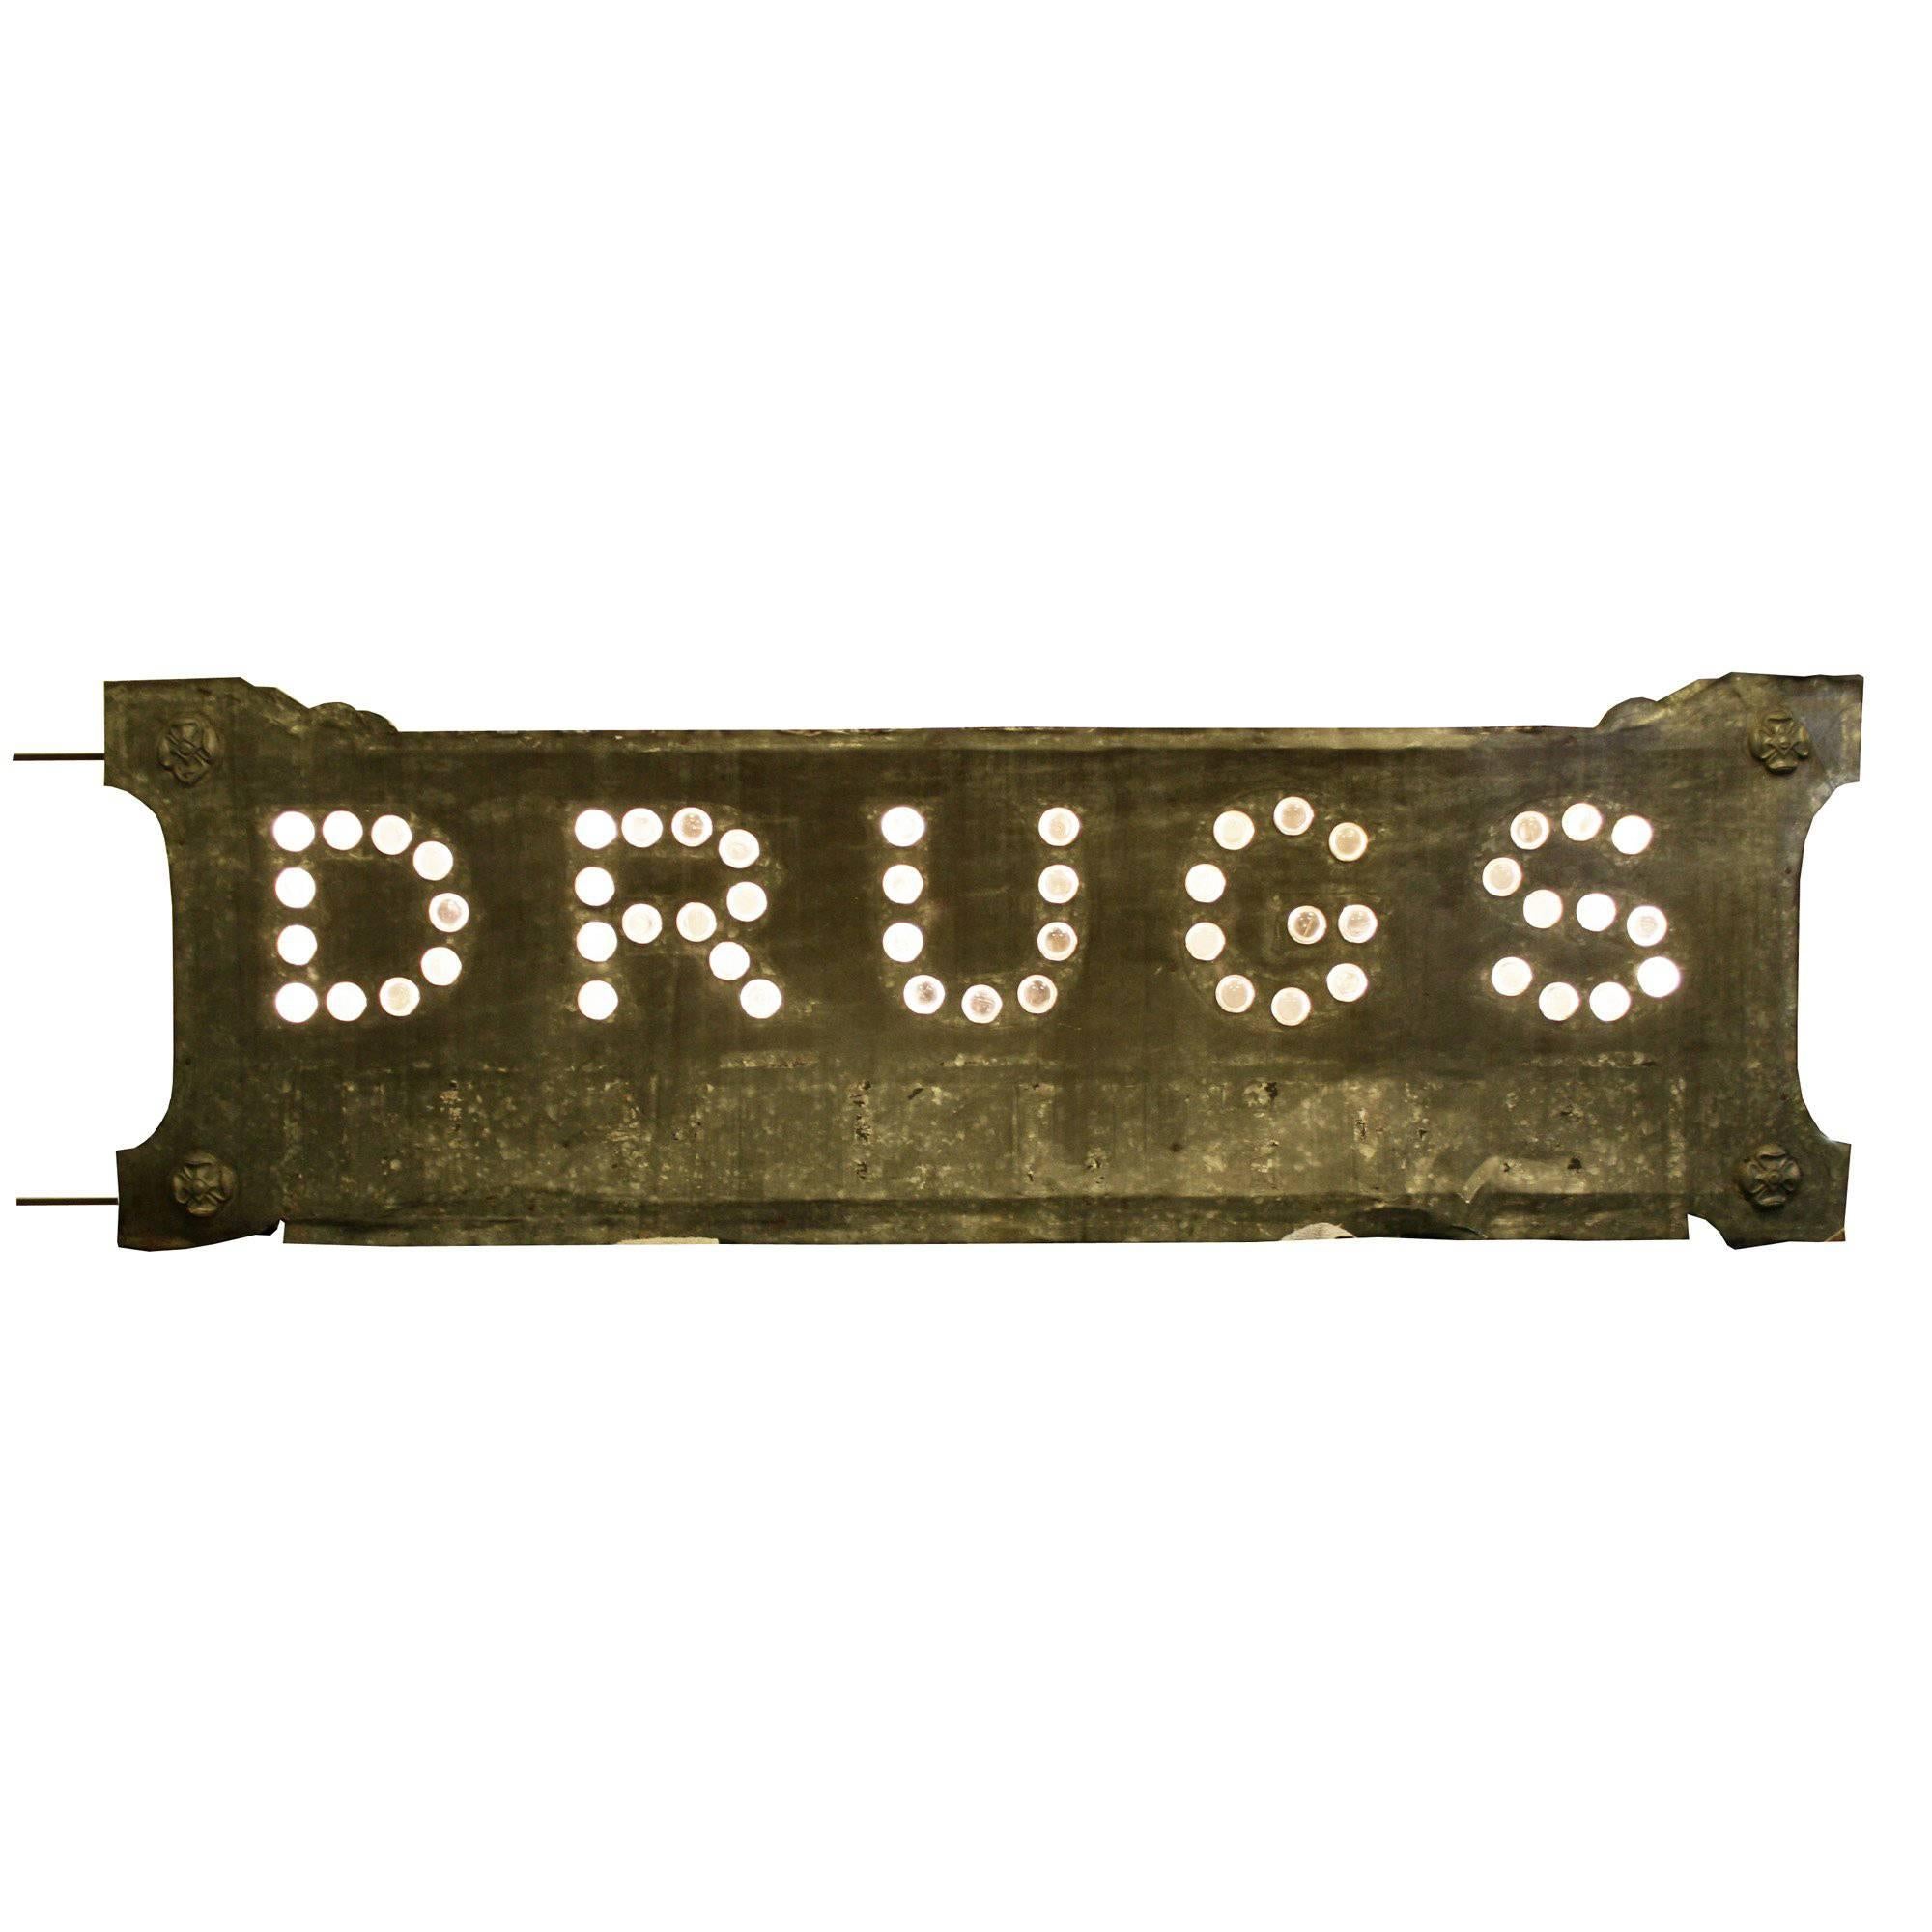 Double-Sided Glass Cat's Eye "DRUGS" Sign, circa 1900